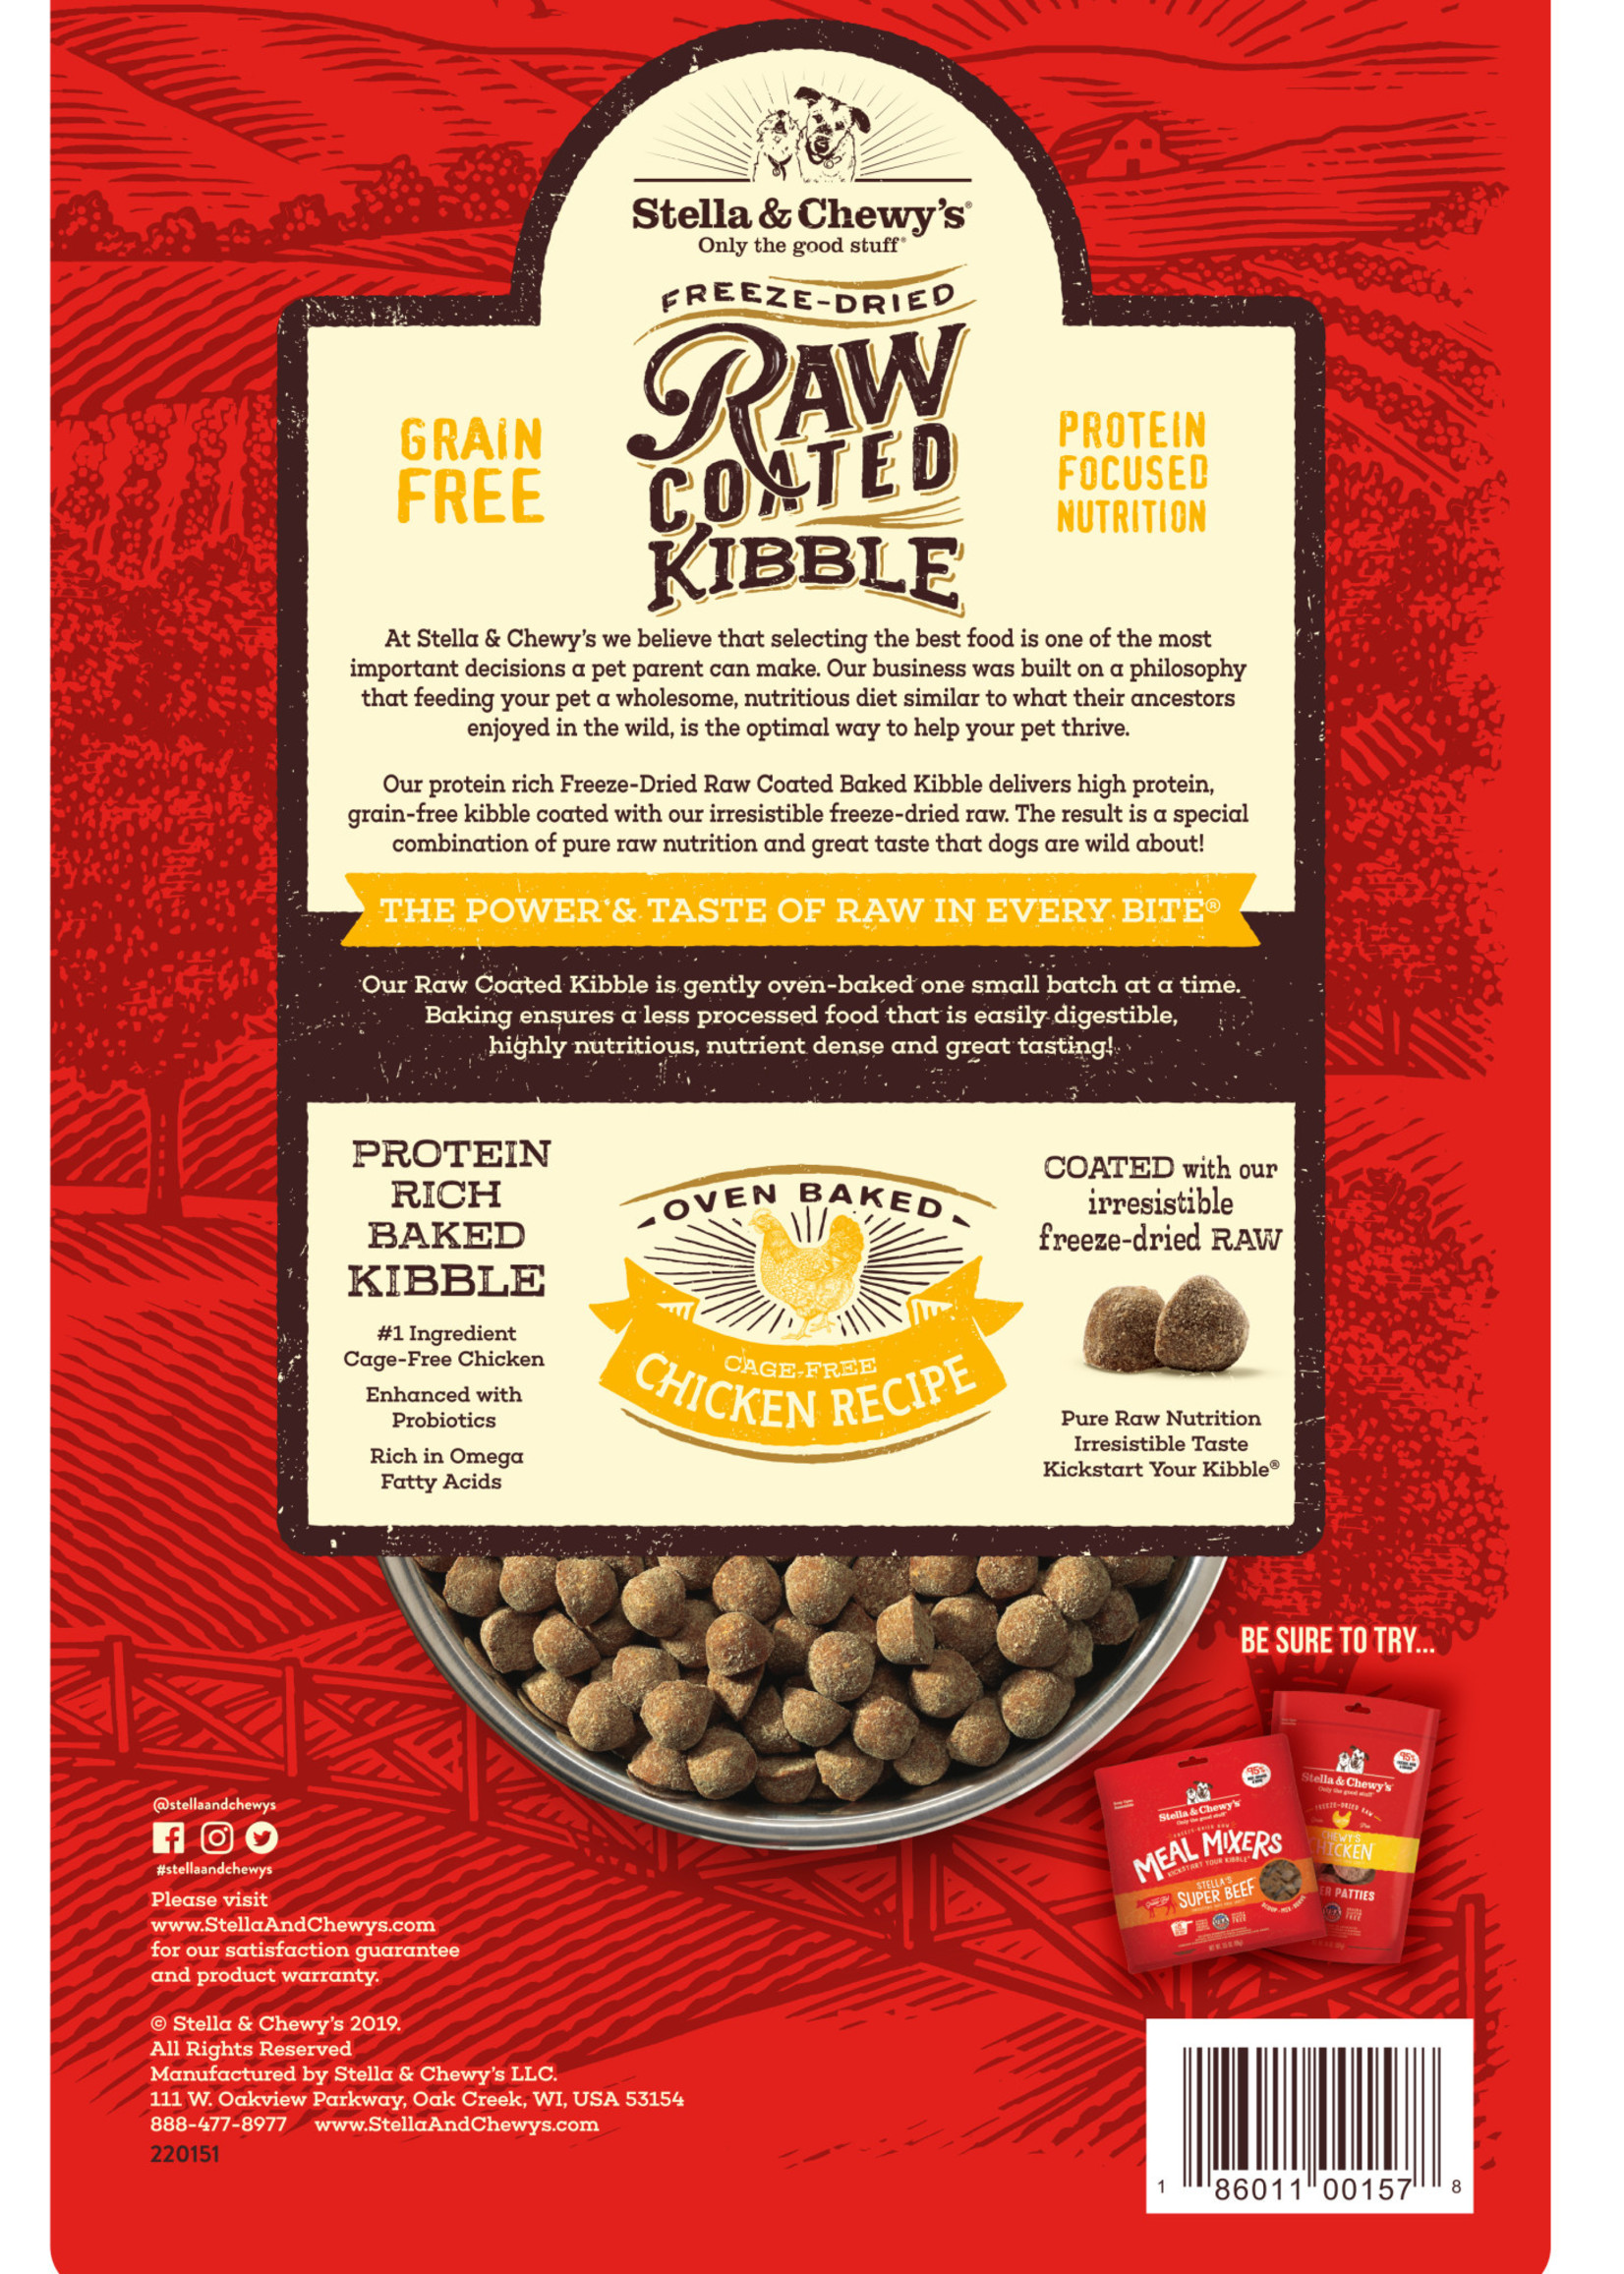 Stella & Chewy’s Raw Coated Baked Kibble Cage-Free Chicken